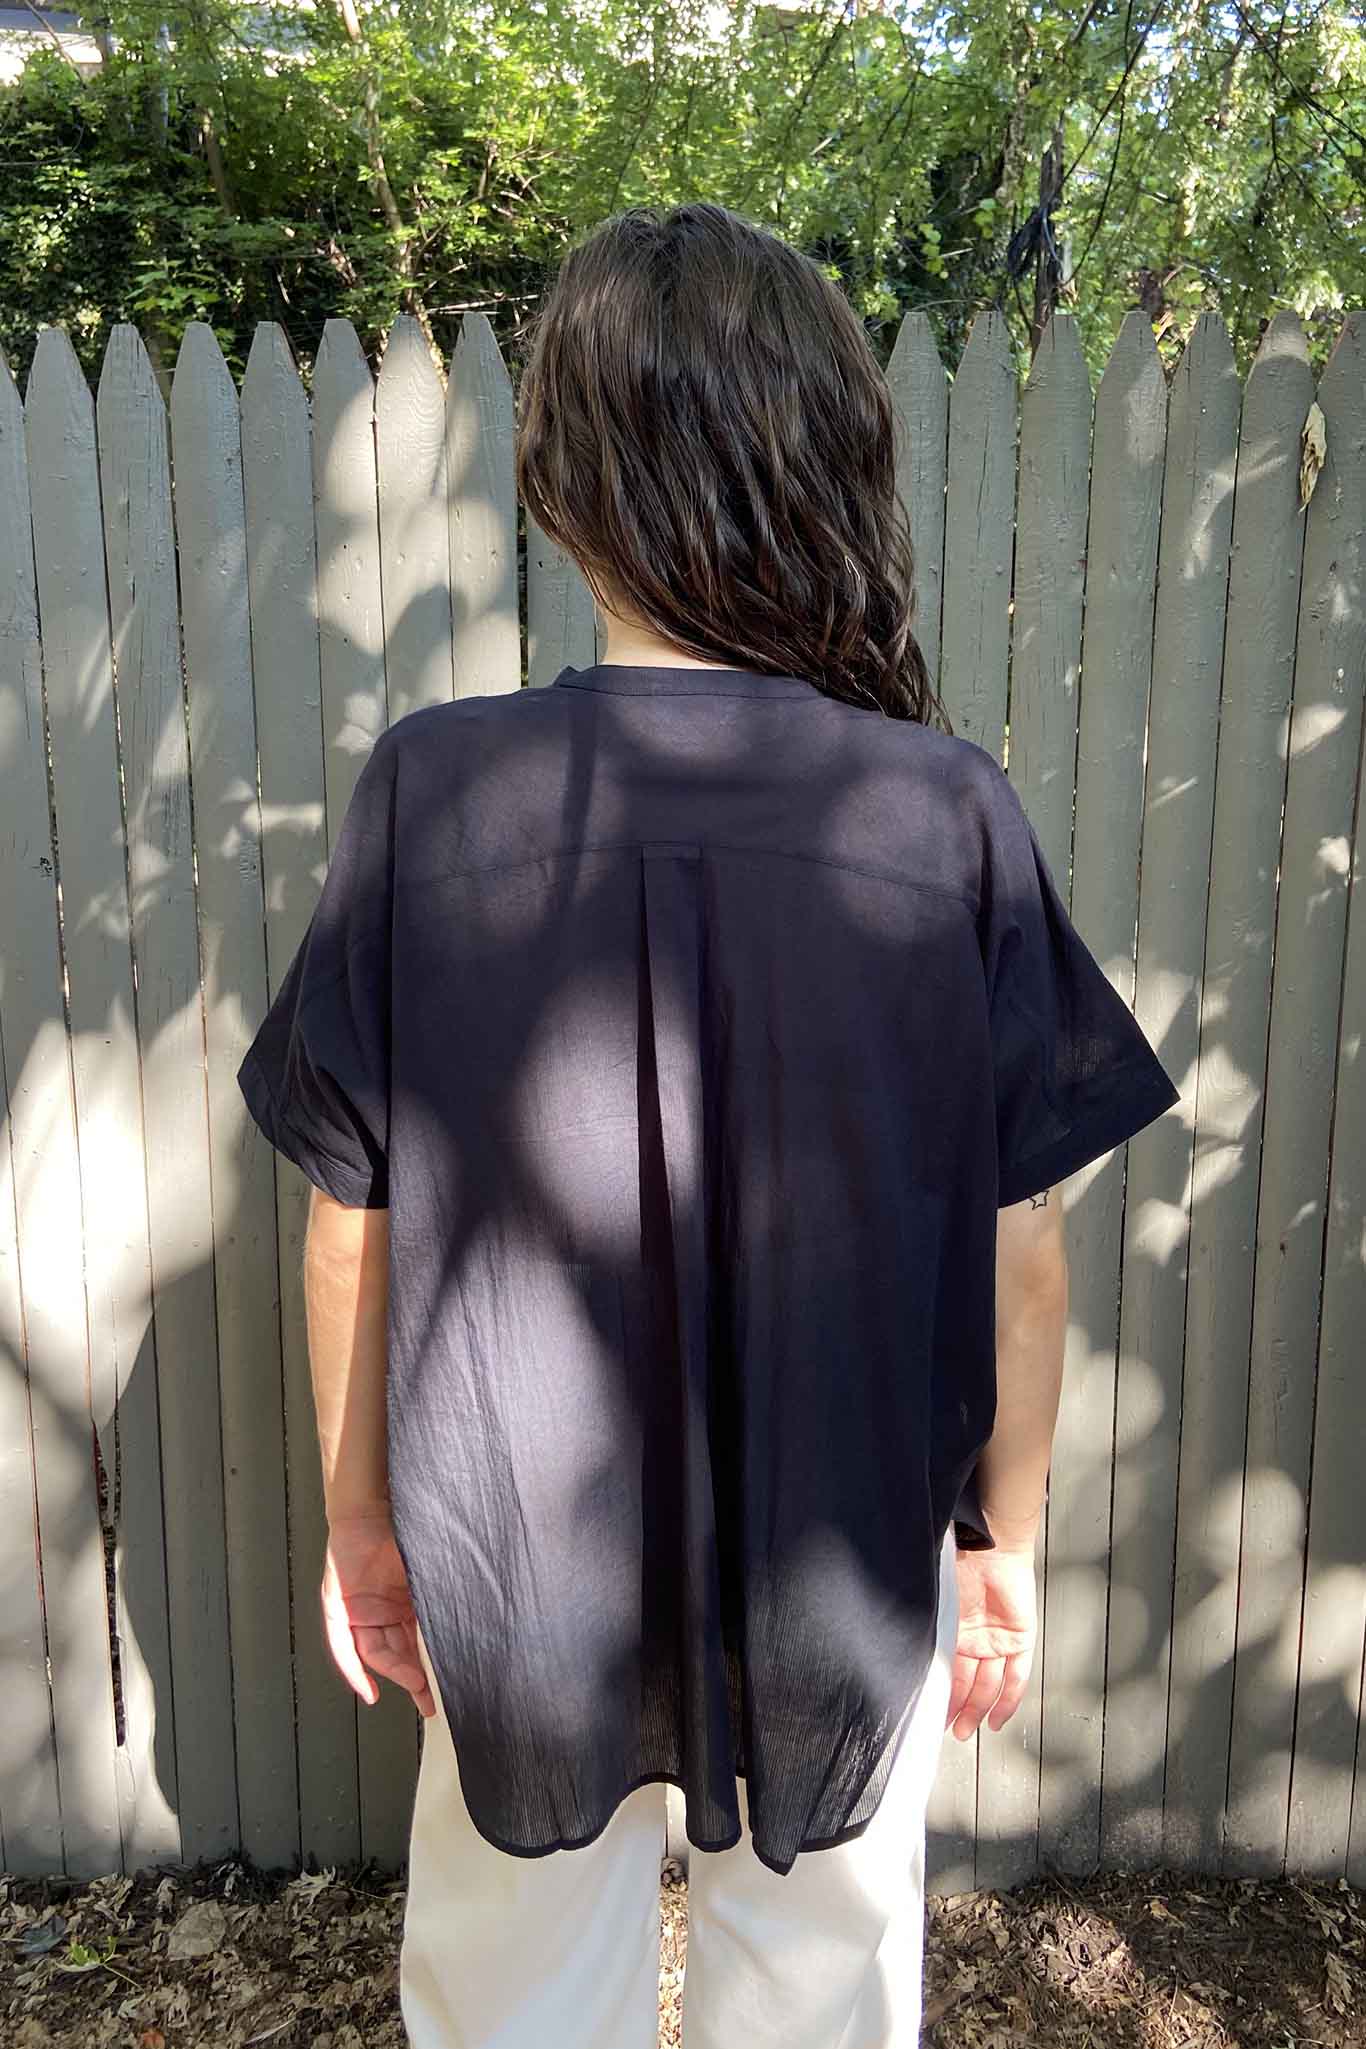 Airy summer button down shirt to keep cool in summer. Short sleeved Shirt.